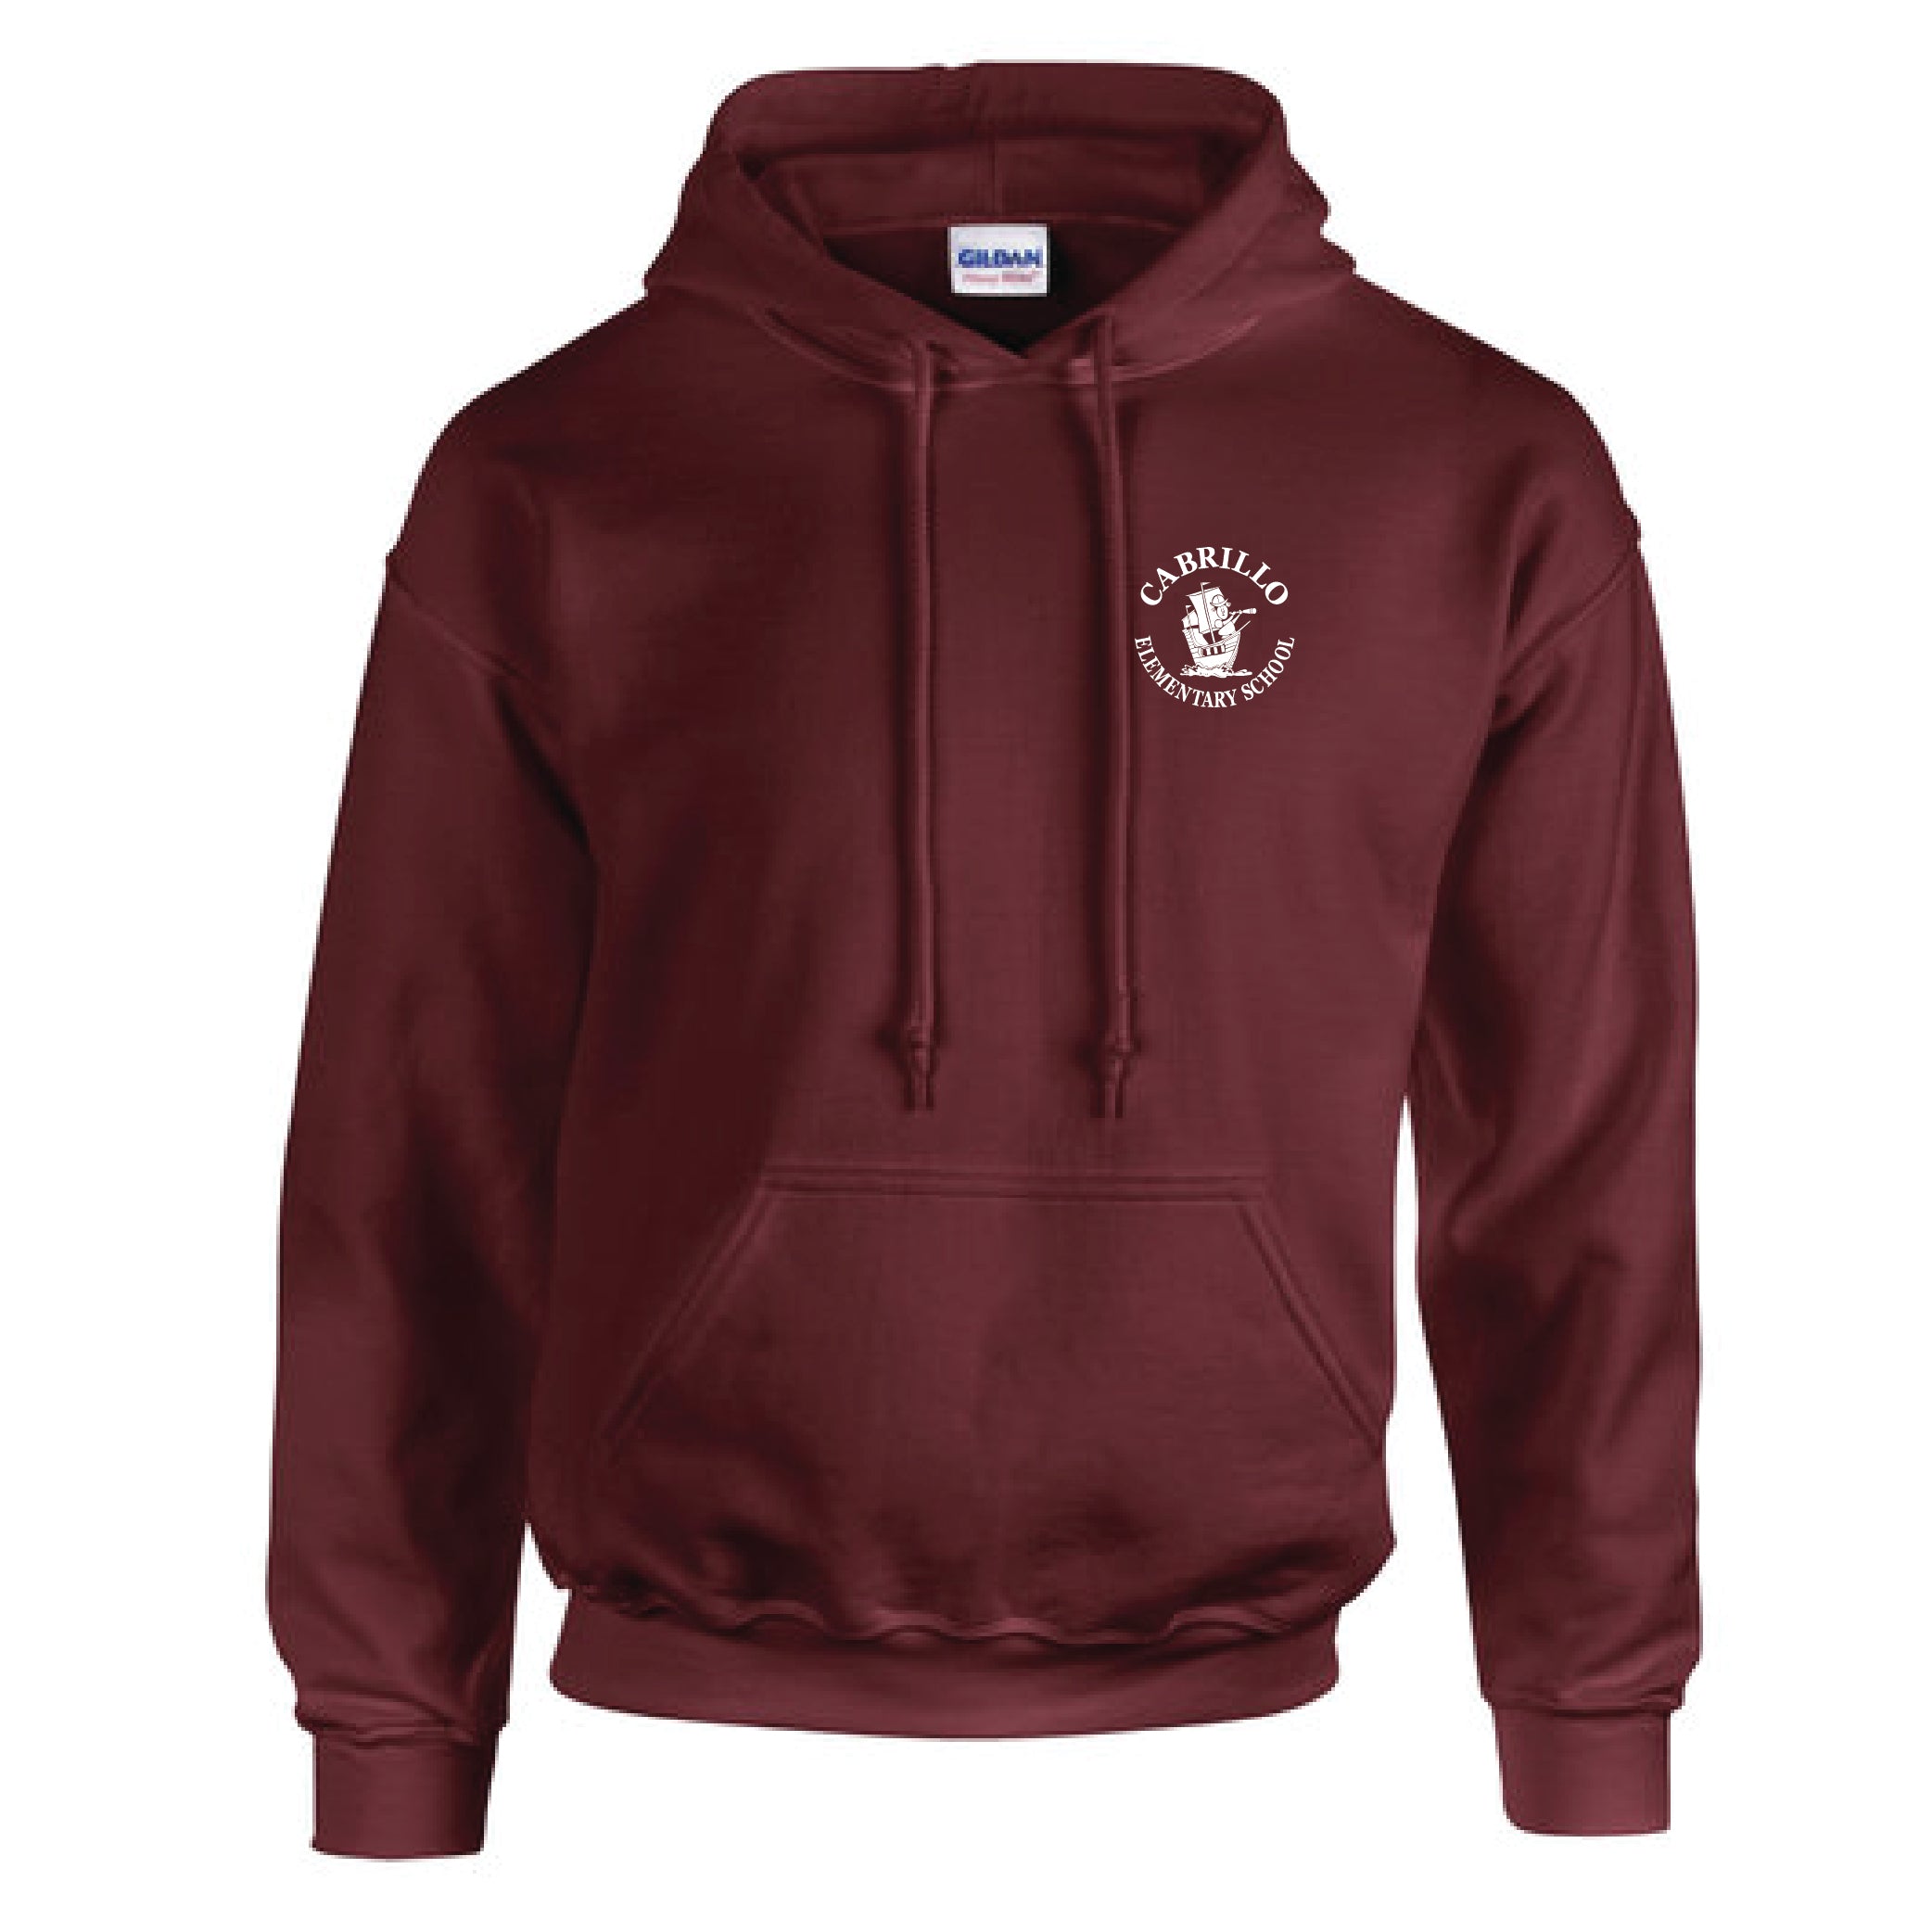 Cabrillo Elementary - Adult Pullover Hoodie - Maroon **PRE-ORDER**